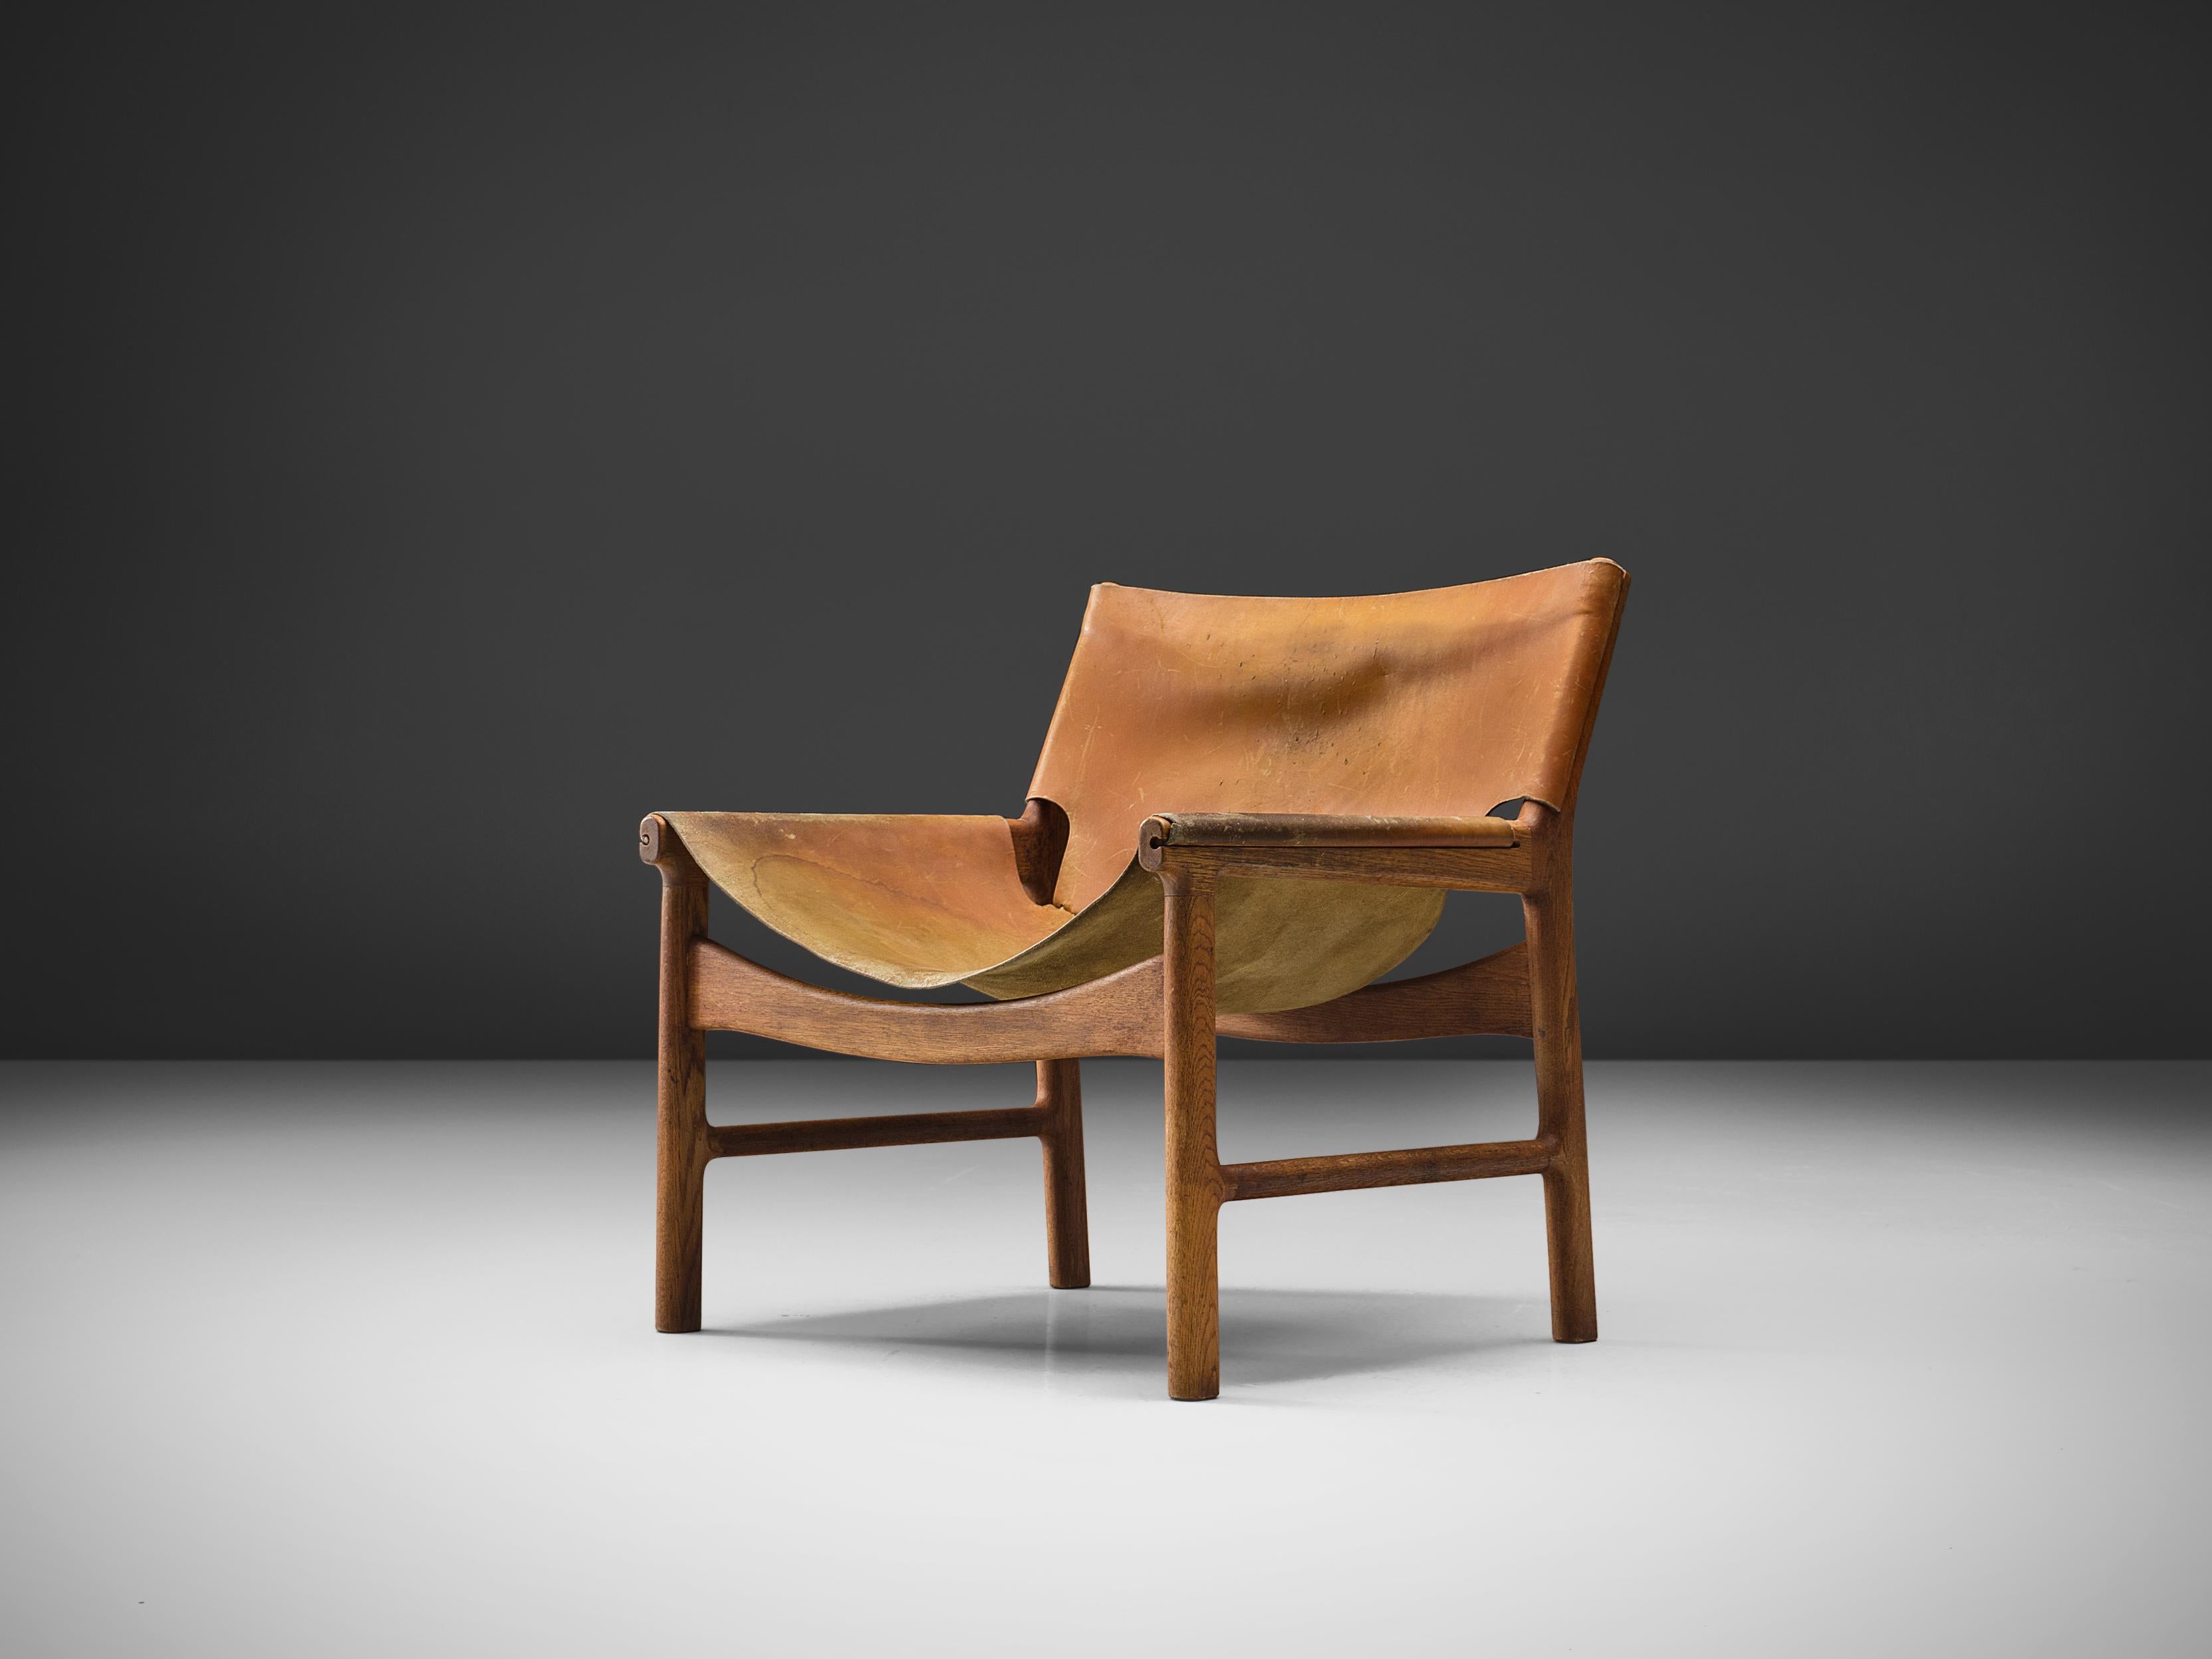 Illum Wikkelsø for Mikael Laursen, easy chair model 103, leather and oak, Denmark, 1960s.

This easy chair is a design by Illum Wikkelsø but produced by master-carver and cabinetmaker Mikael Laursen. The leather is attached to the frame and